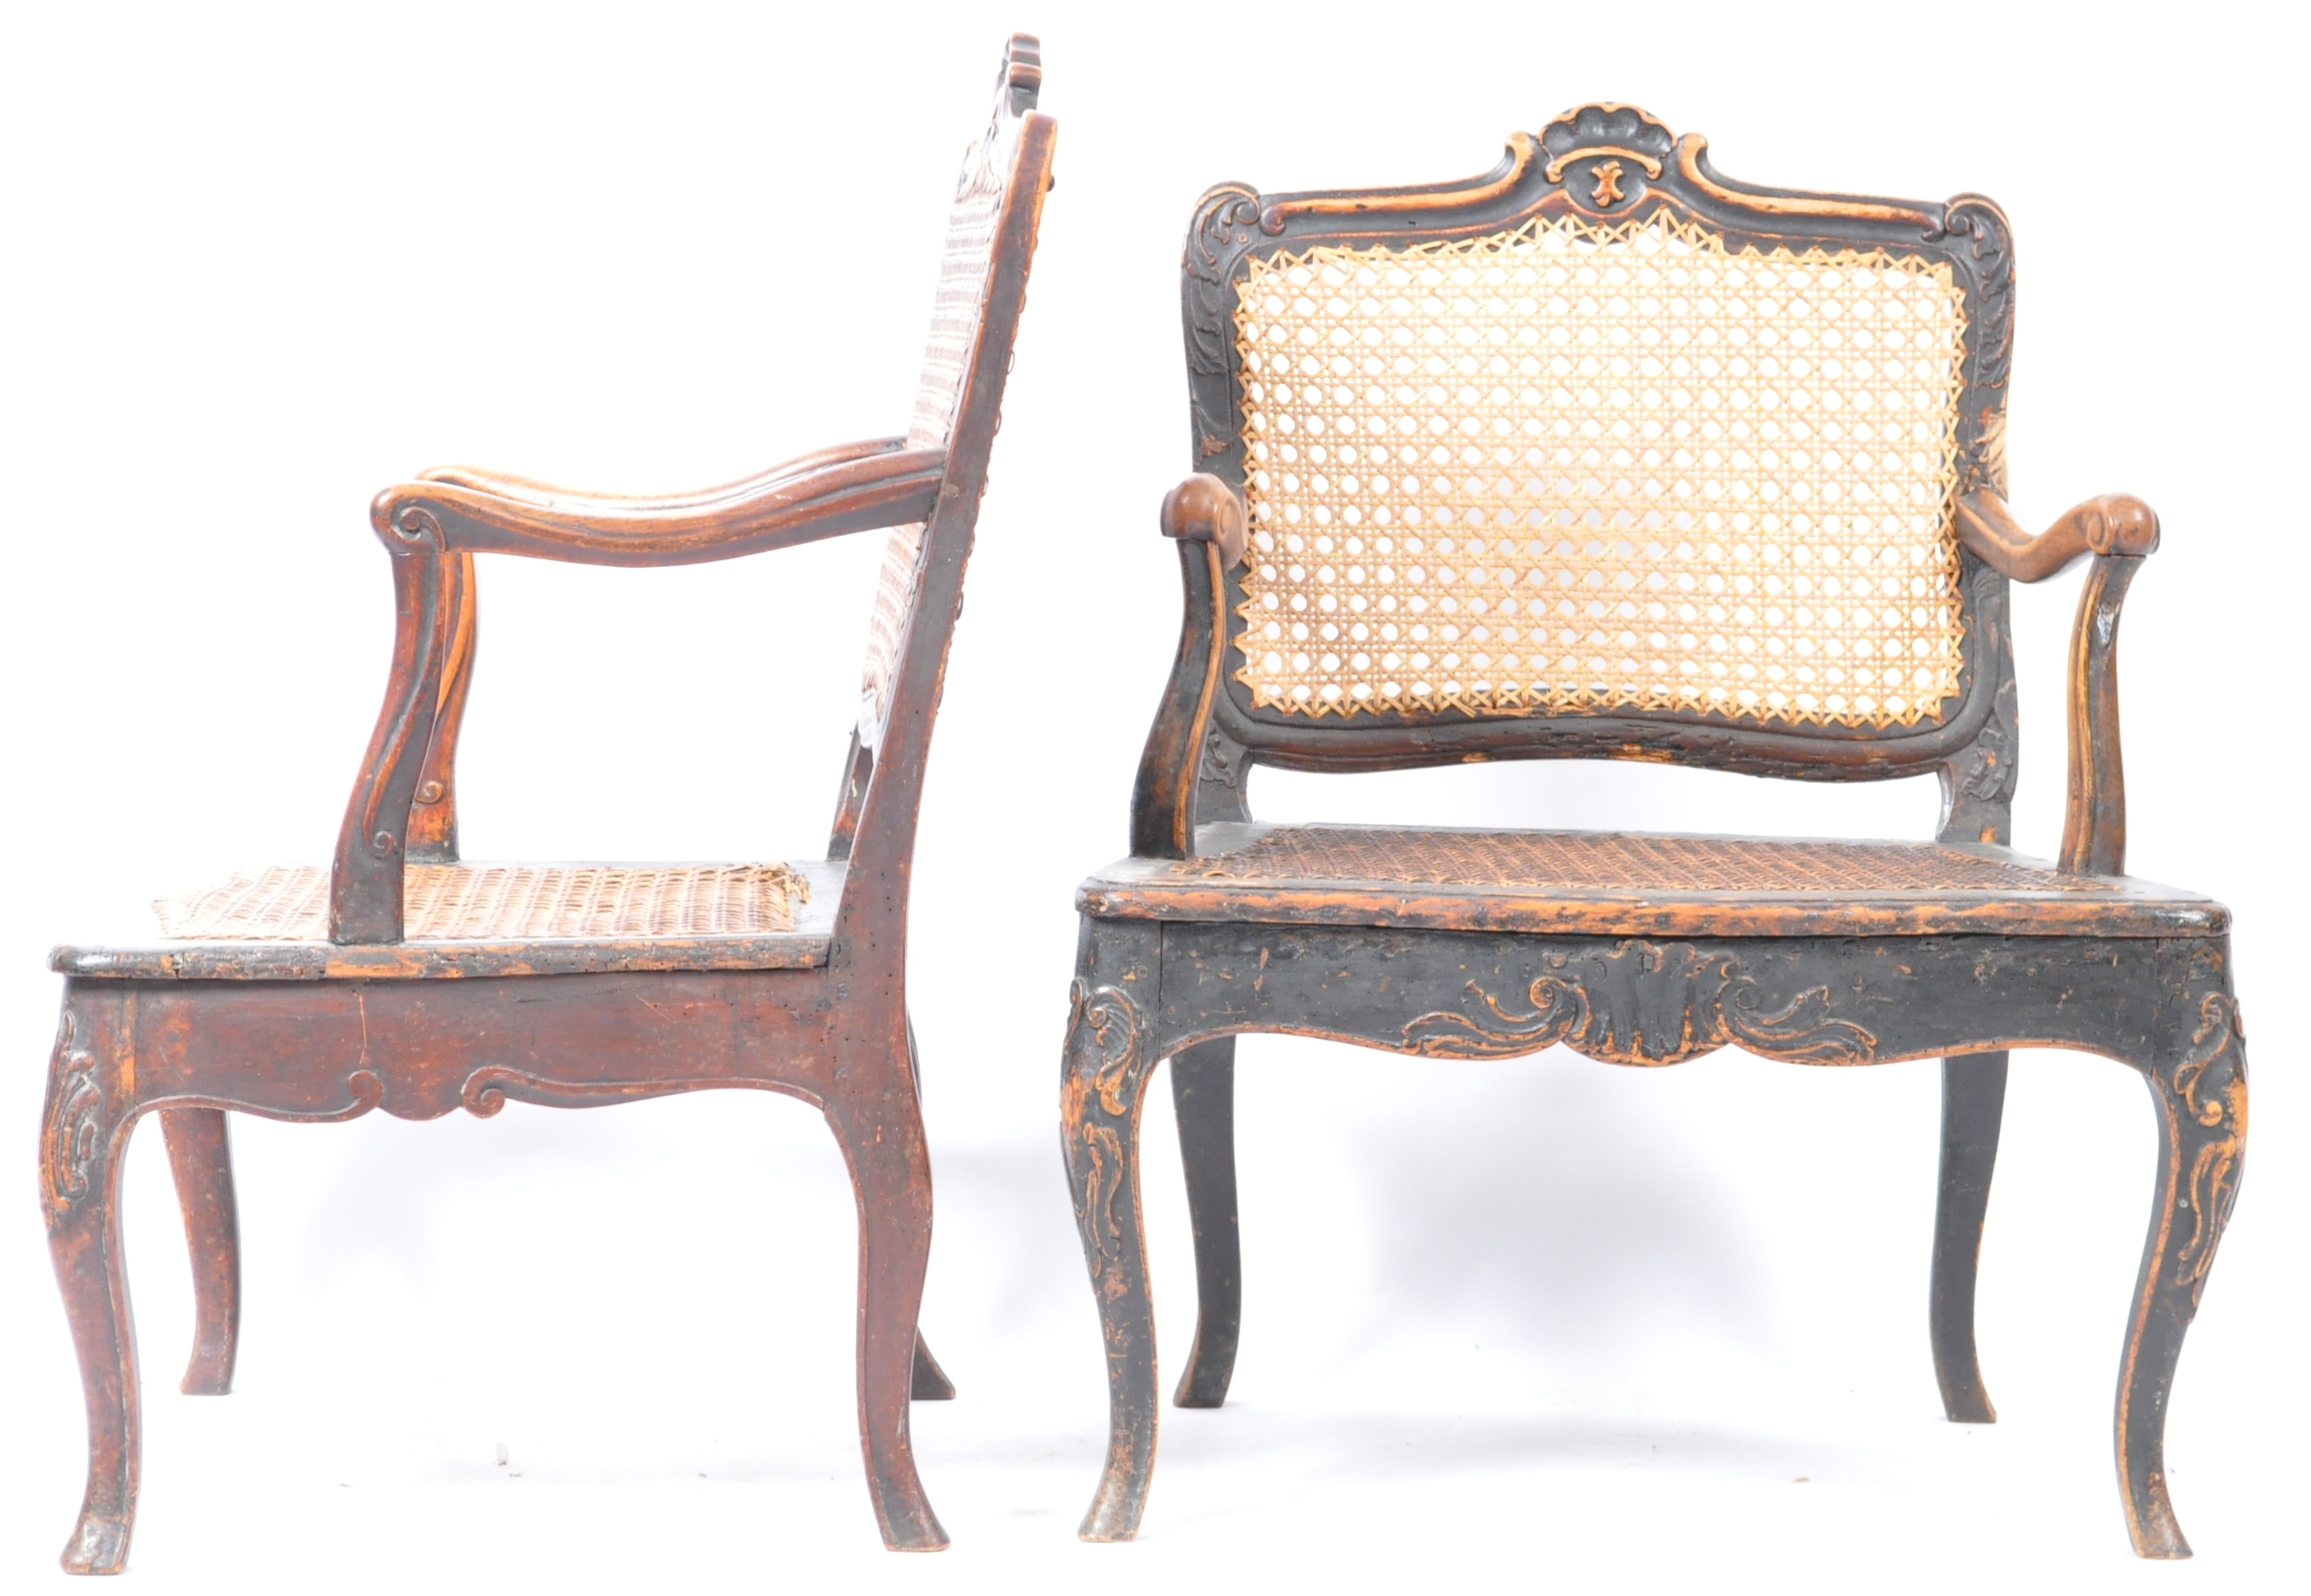 ANTIQUE PAIR OF 18TH CENTURY GEORGIAN CANE & WALNUT ELBOW CHAIRS - Image 9 of 9